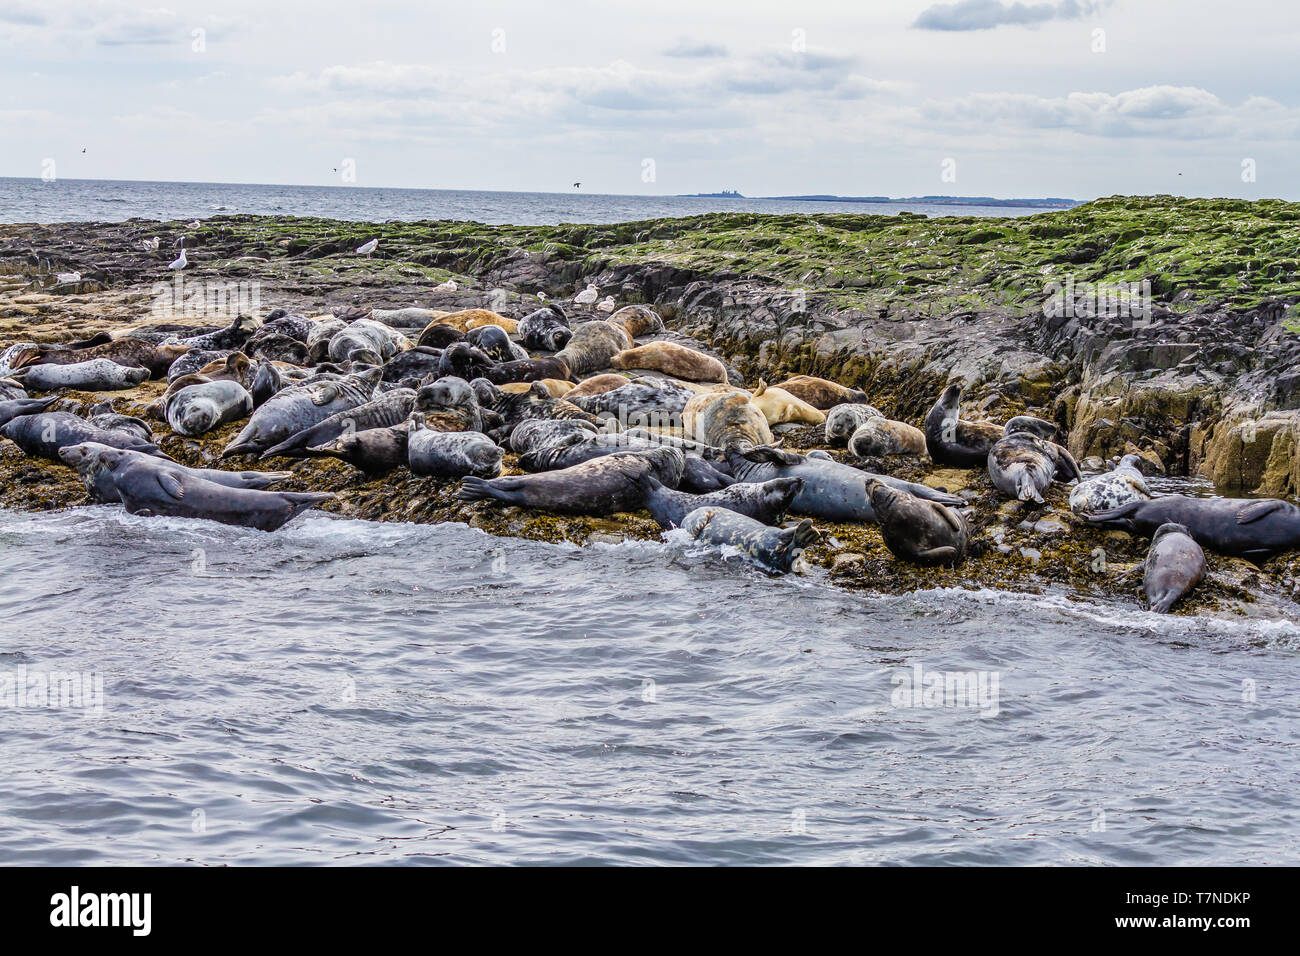 Colony of Grey Seals at home on the Farne Islands, Northumberland, UK. May 2018. Stock Photo